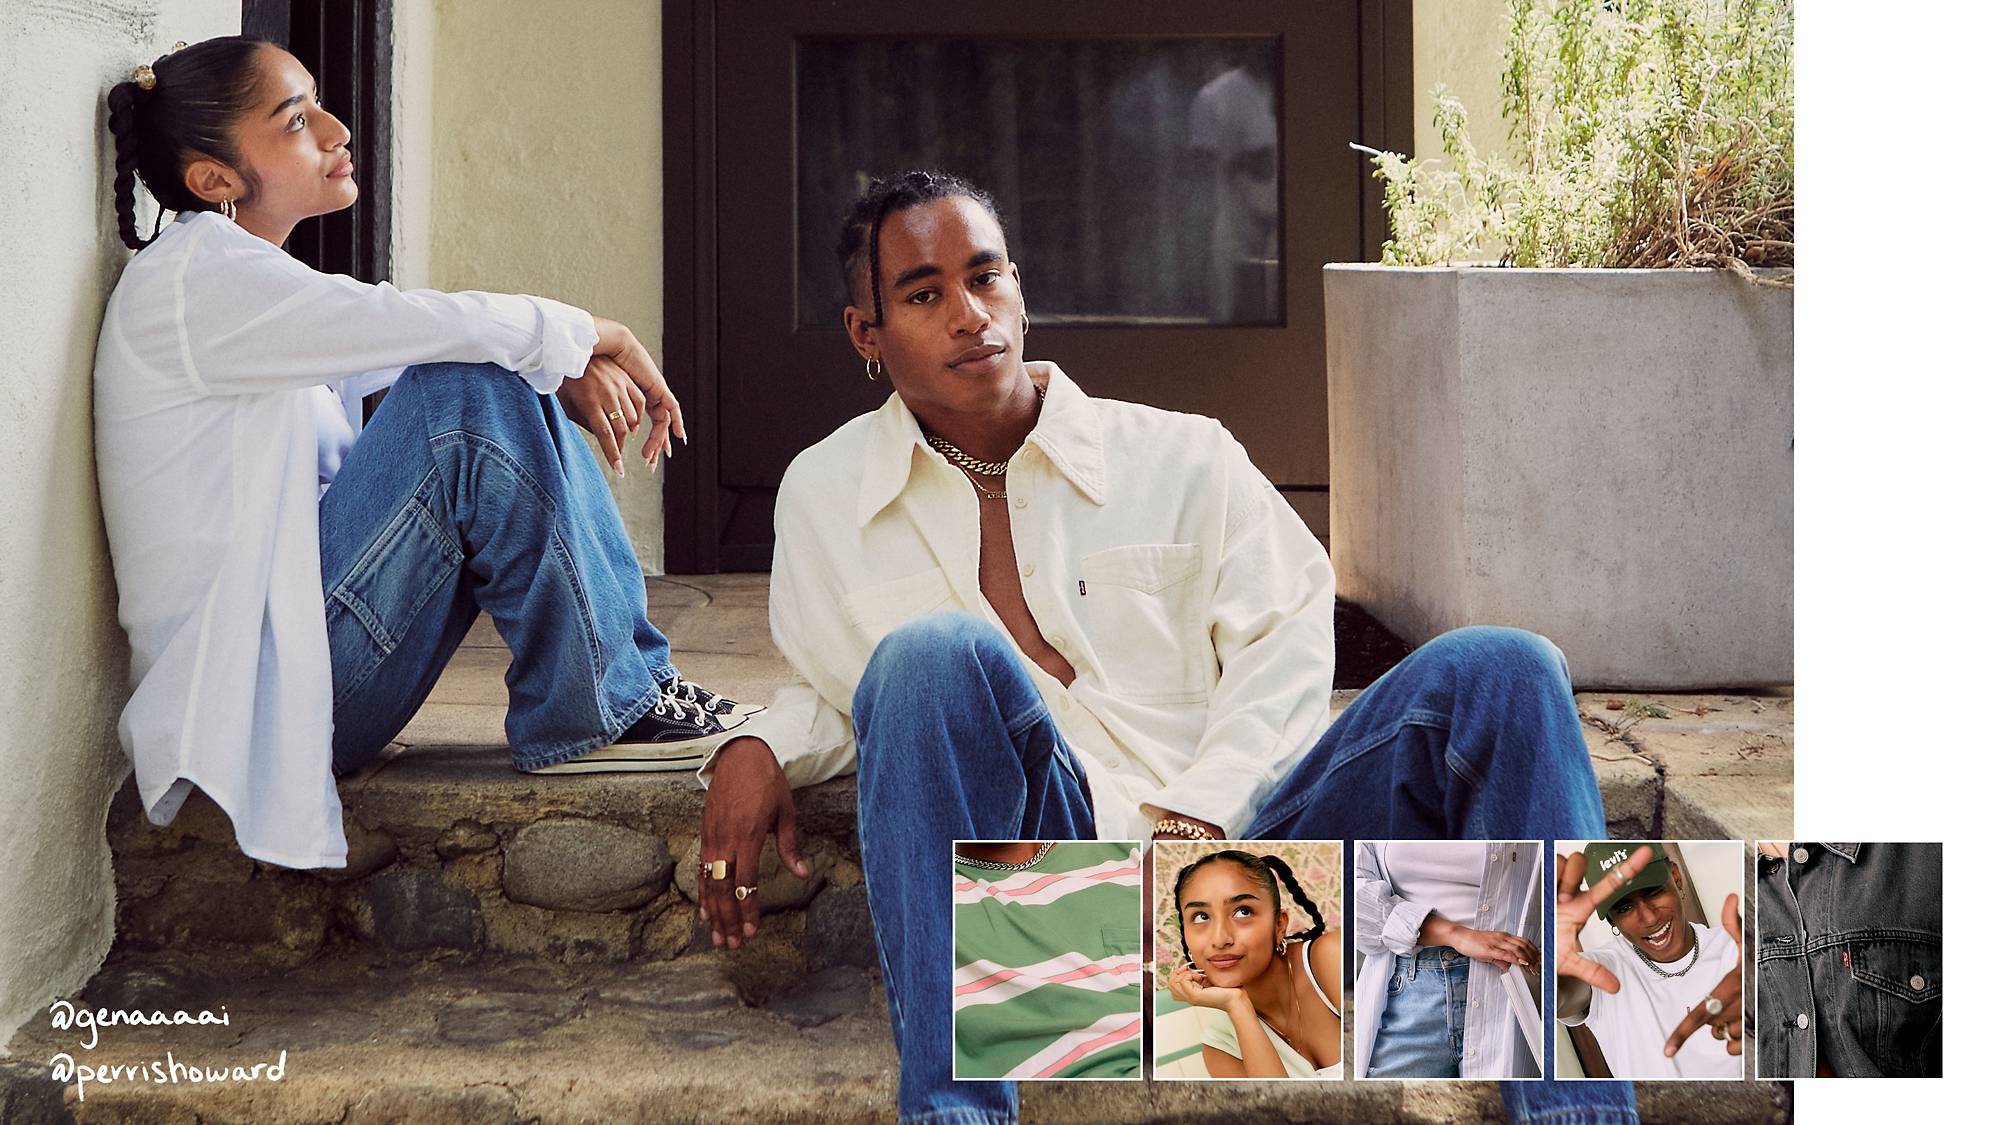 Back to School Shopping featuring Perris Howard and Genai Nakama sitting on steps in blue jeans and button downs